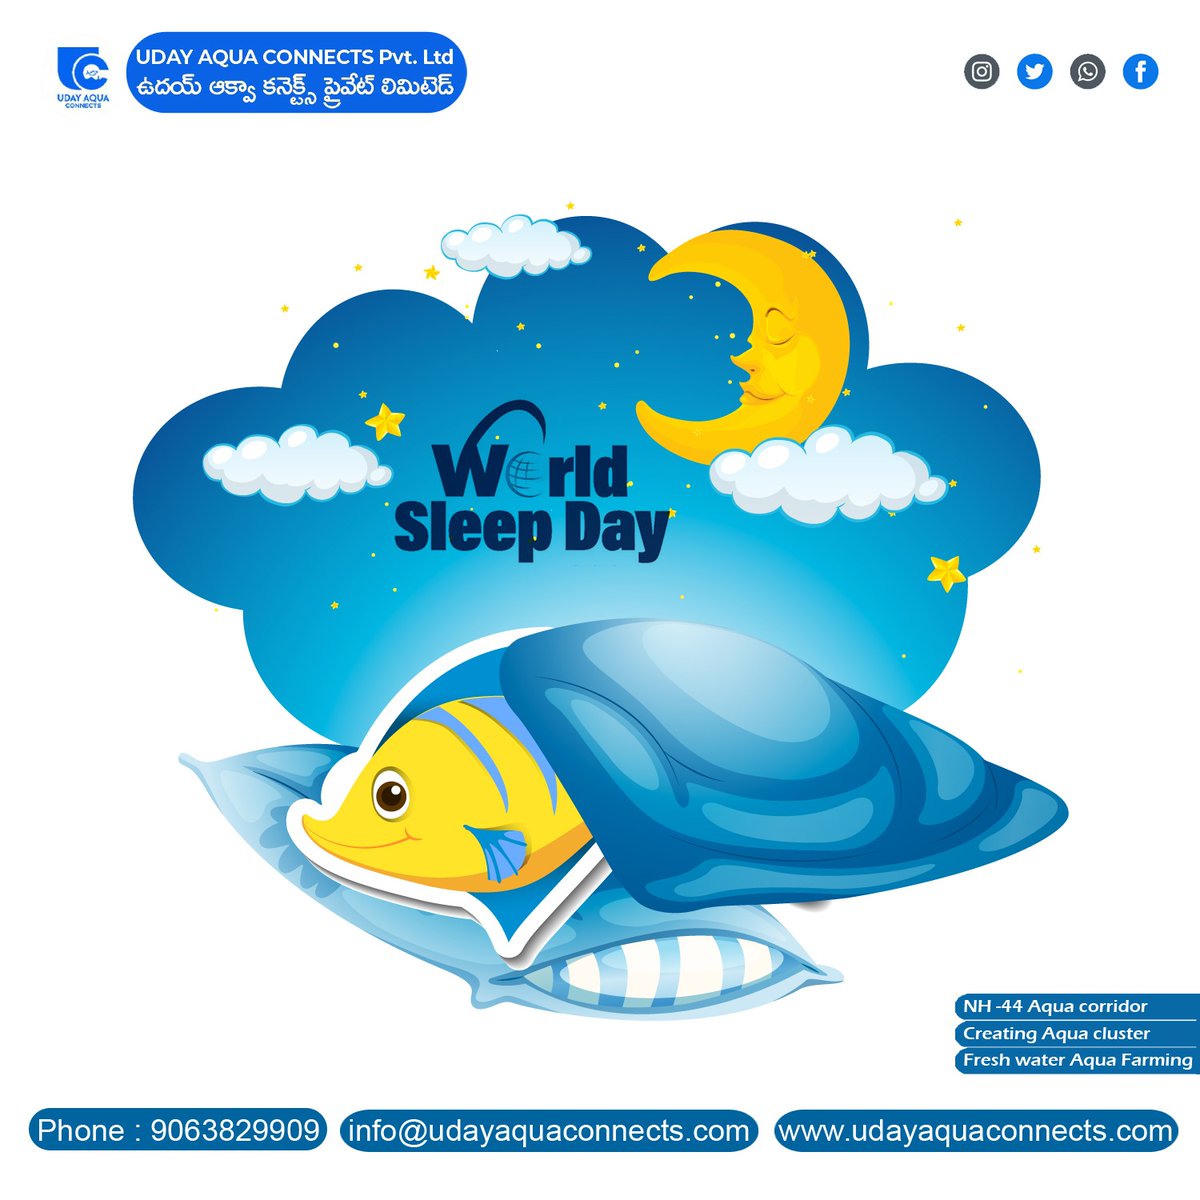 #Happy world sleep day💤🛌🌙😴💭🌌🌜.

'🐟'On World Sleep Day, let's dive into the depths of slumber like fish into the ocean, finding tranquility and rejuvenation in the silent currents of our dreams.'🌊💤'
 #sleepday😴 #happysleepworldday #stresslesssleep #sleep #Sleepforhealth